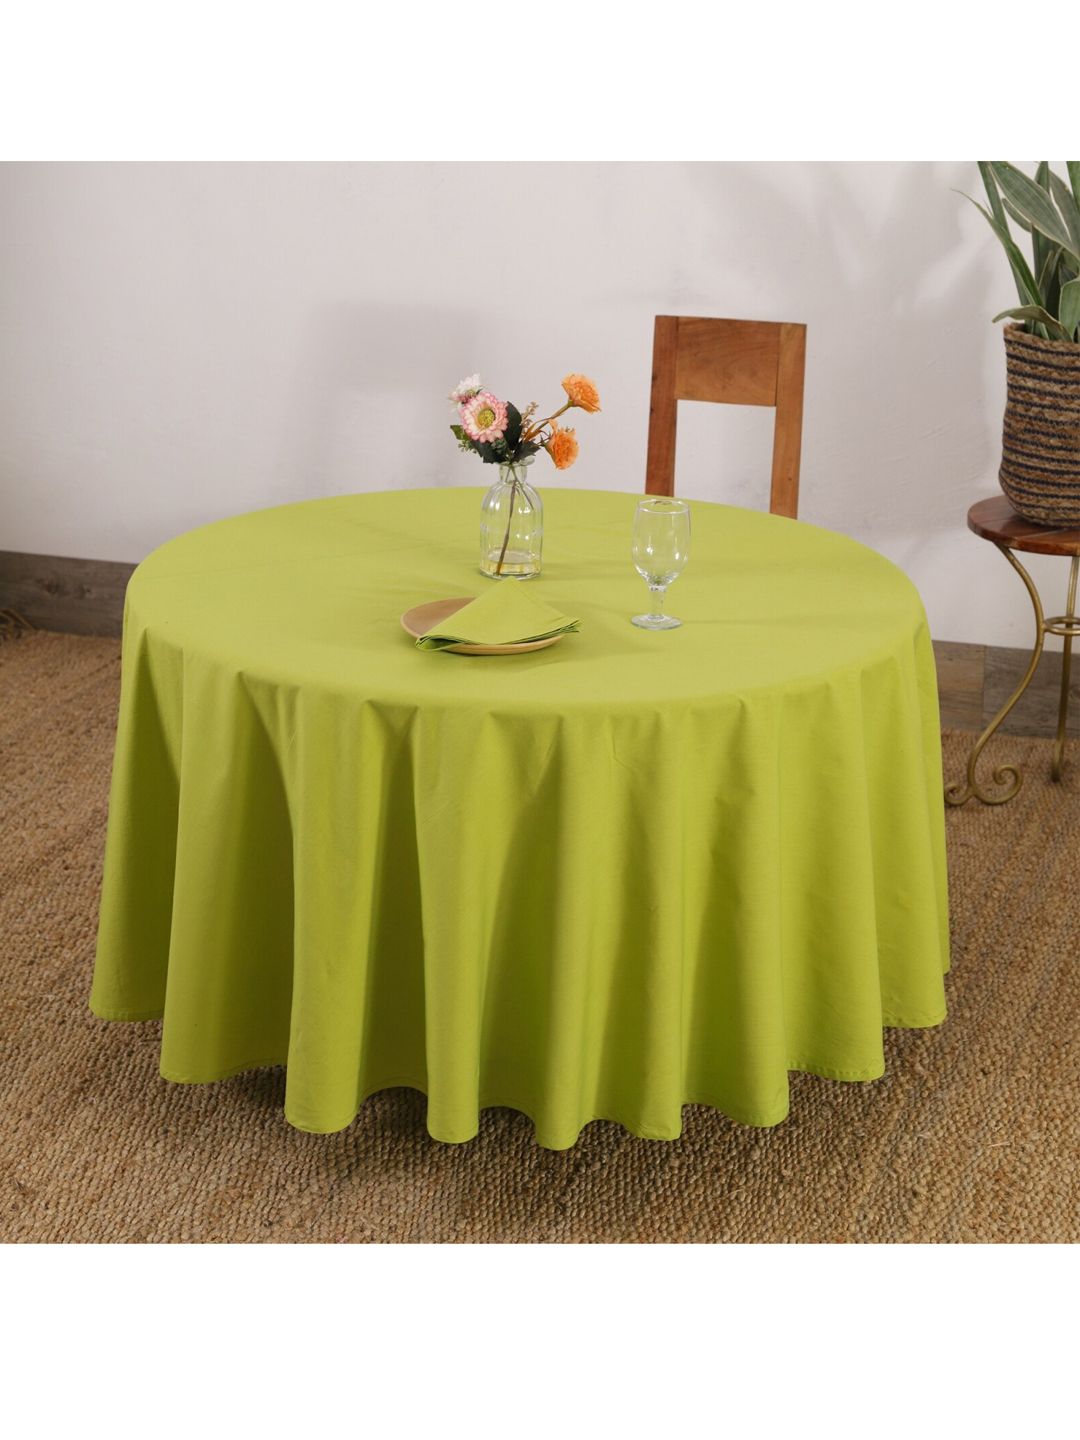 HANDICRAFT PALACE Unisex Lime Green Table Covers Price in India